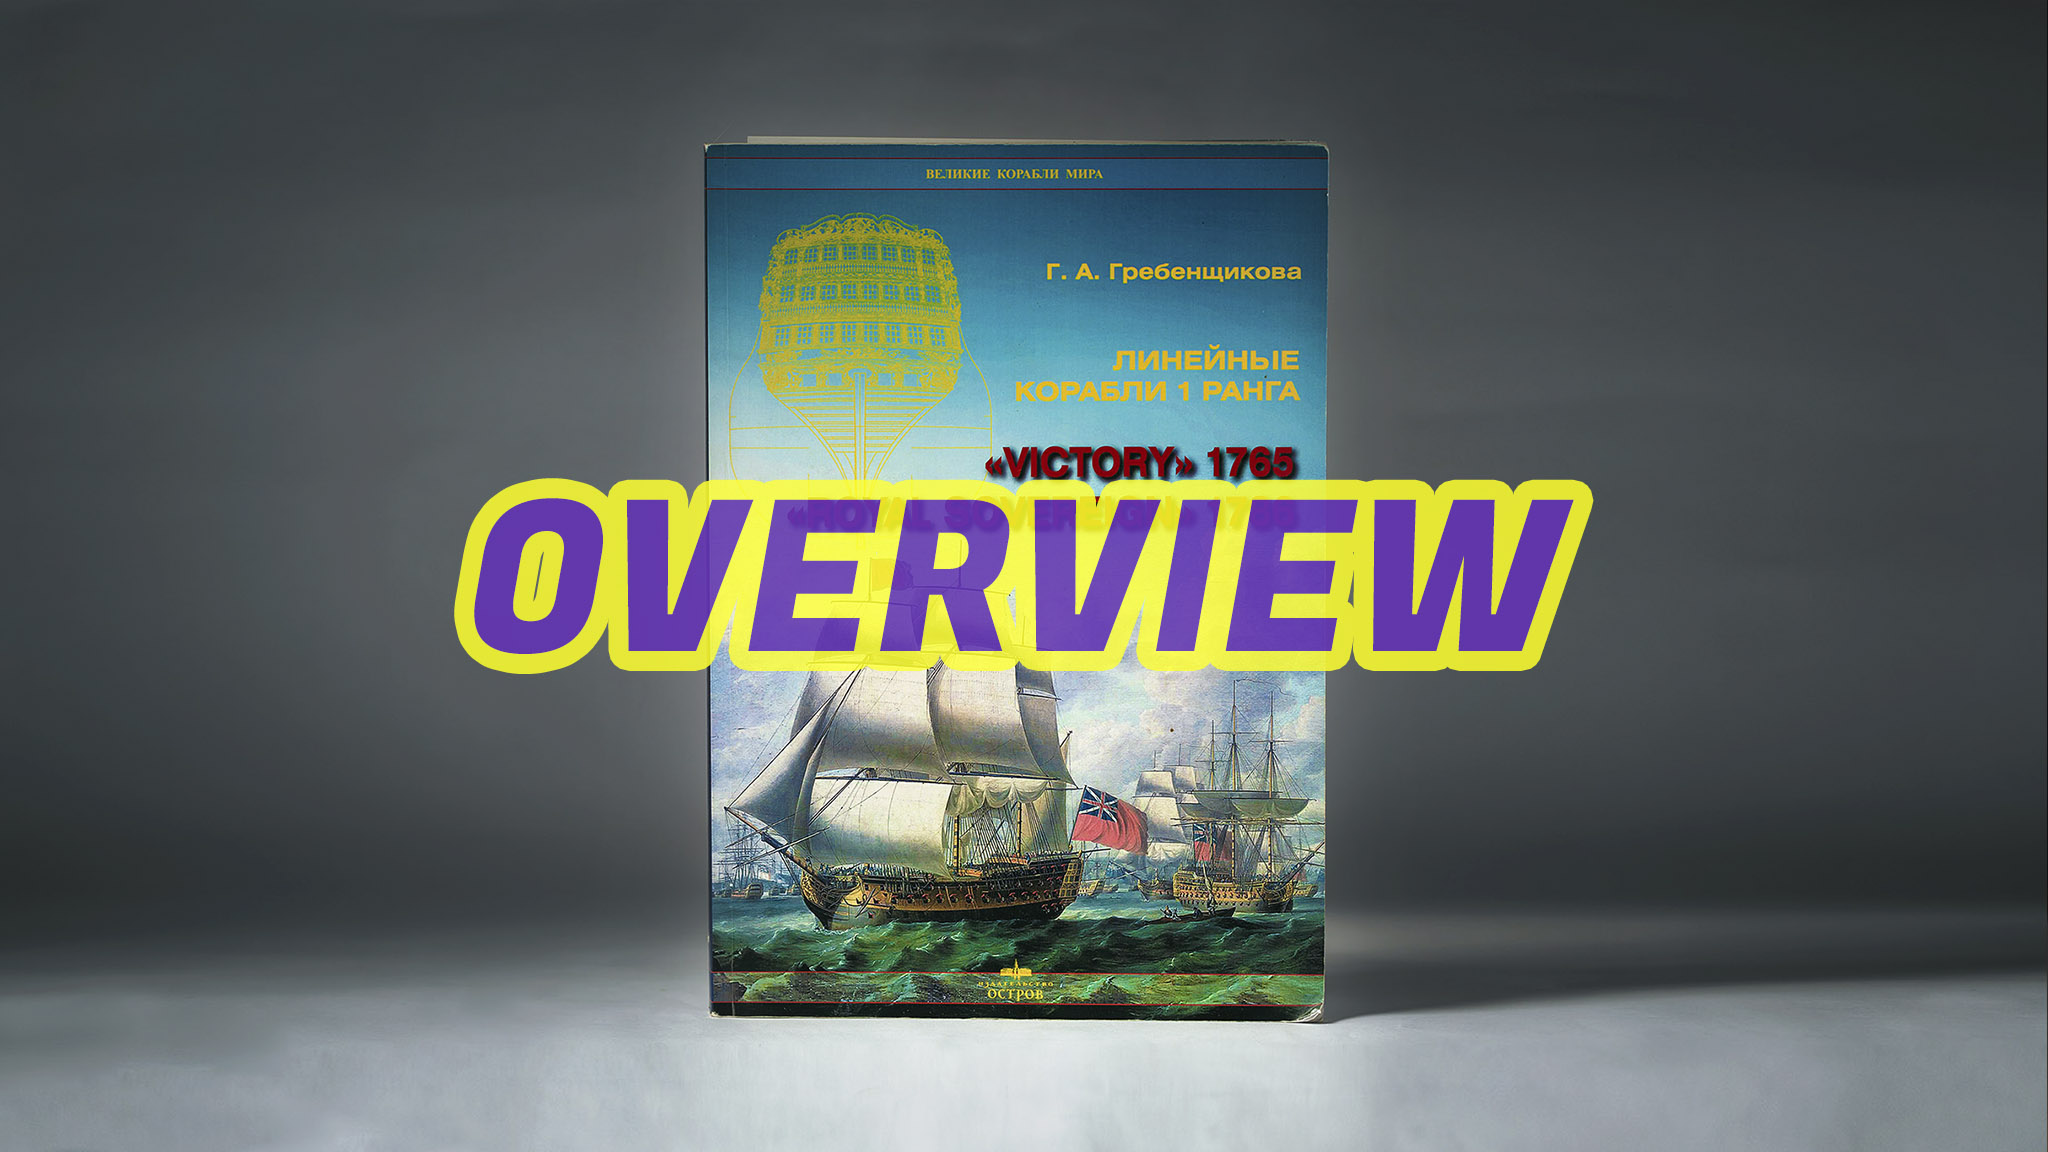 064-OVERVIEW-VICTORY_ROYAL SOVEREIGN.jpg